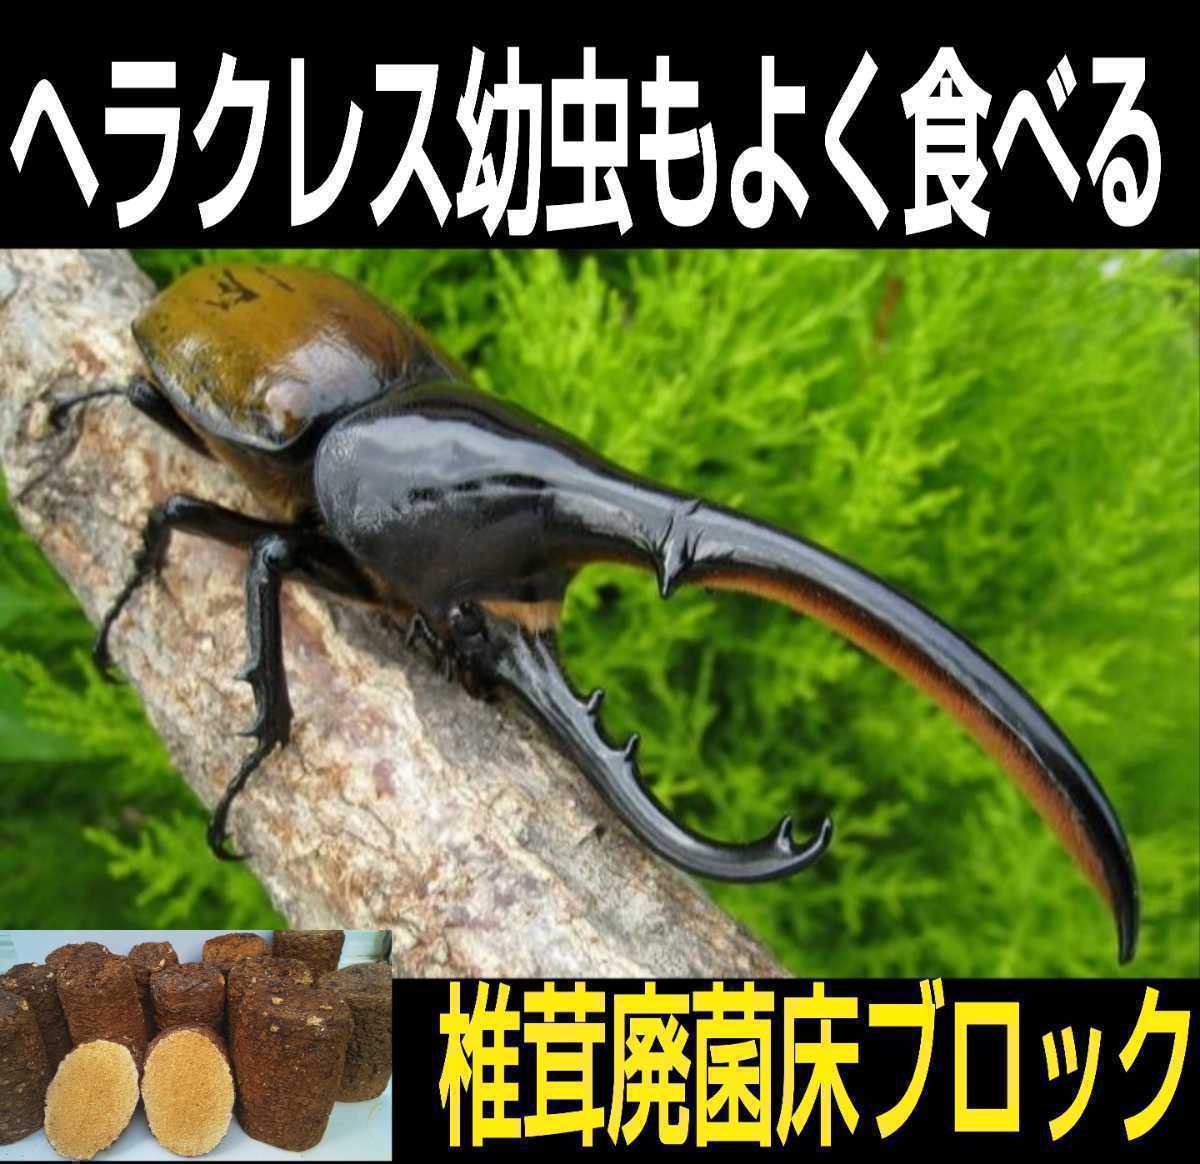  rhinoceros beetle larva. nutrition strengthen .*.. waste . floor [8 block ] departure . mat . embed . larva ... included mo Limo li meal .. on a grand scale become! sawtooth oak, 100% feedstocks 